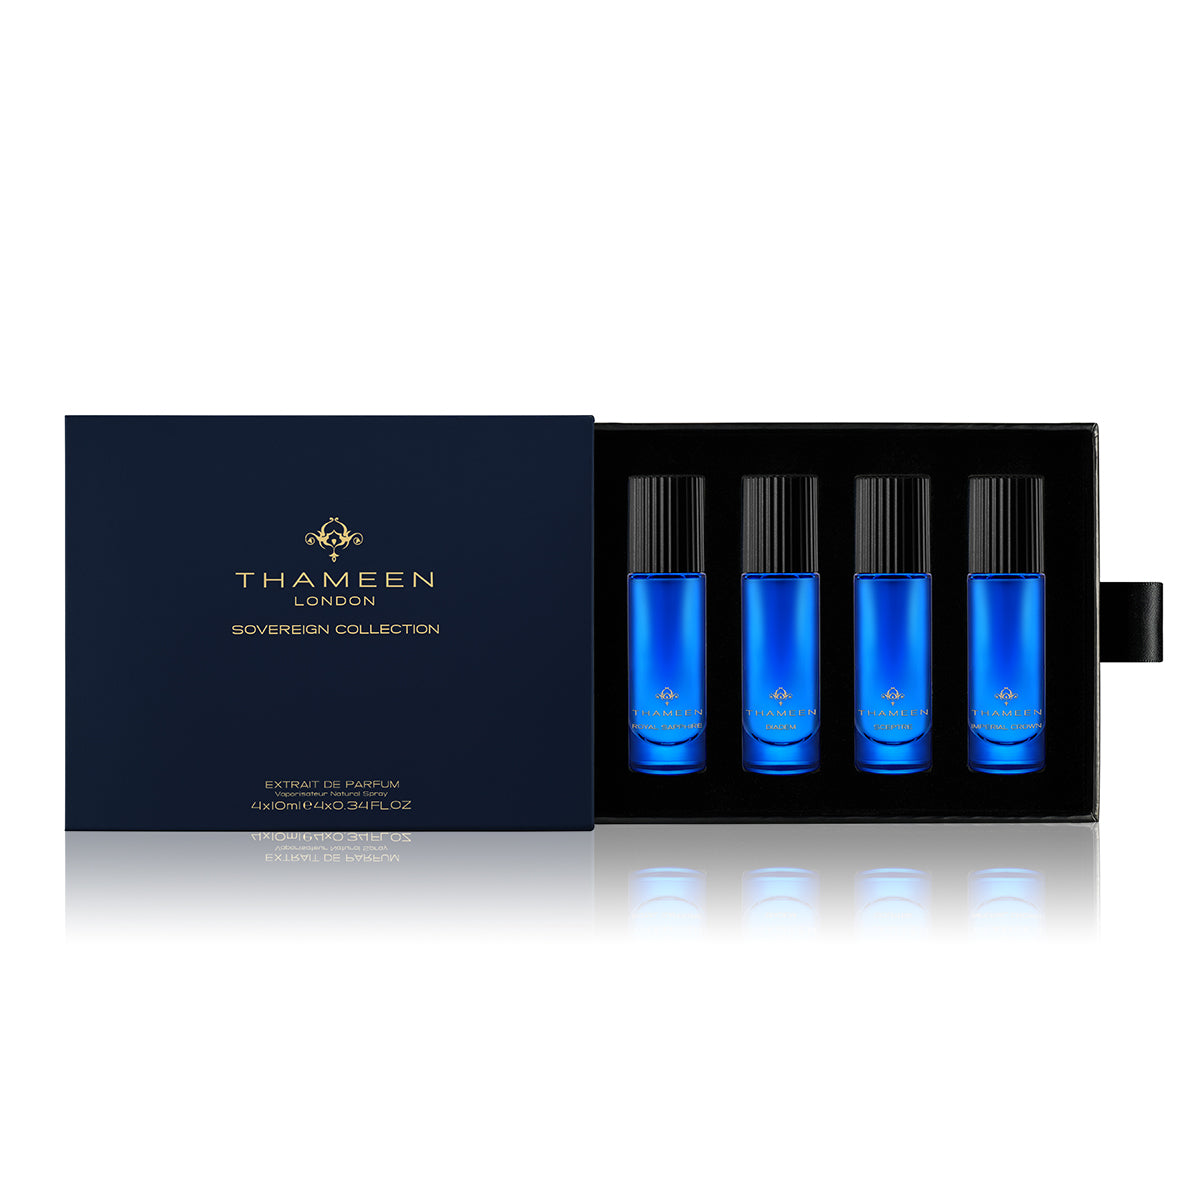 Sovereign Collection Gift Set - Thameen